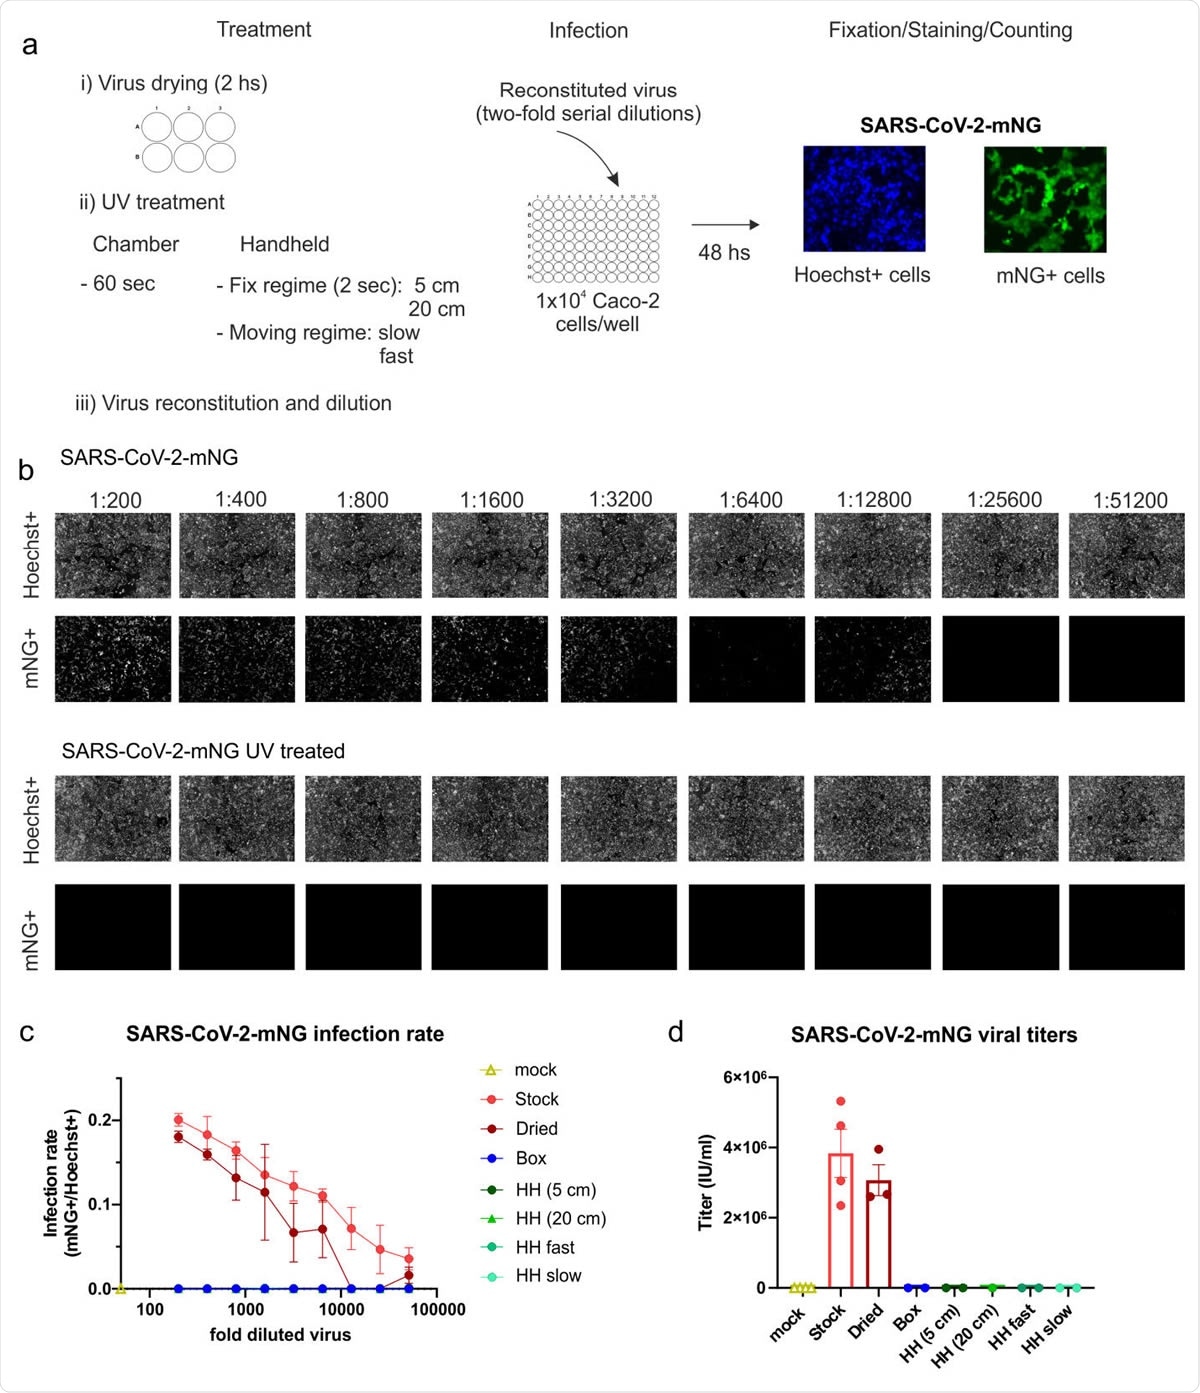 Inactivation of SARS-CoV-2 by UV-C light treatment. (a) Experimental layout of the different UV-treatments and the infection assay employed using the green-fluorescent virus SARS-CoV-2.mNG. (b) Primary data showing the results of the infection assay using the non-treated stock virus as a positive control and the UV-treated virus (HH, fast-moving regime). In the upper row, the total amount of cells for each well of the two-fold serial dilution of virus is shown as Hoechst+. In the 249 lower, infected cells are visualized indicated as mNG+ cells. (c) Infection rate curves for UV-irradiated SARS-CoV-2-mNG using different UV251 treatments. The graph shows the infection rate at each two-fold serial dilution, calculated as the number of infected cells (mNG+) over the total number of cells (Hoechst+) for the non253 treated viral stock (n=4), dried viral stock (n=3), and dried and UV-irradiated virus using five different UV-treatments (n=2). Data are presented as mean +/- SEM of the number of biological replicates indicated above. (d) SARS-CoV-2-mNG viral titers after UV-treatment. The graph shows the viral titers calculated in IU/mL for the mock-infected, non-treated, and dried stock as well as the dried and UV-irradiated virus under the different treatments. The number of biological replicates is directly plotted and indicated in 1c. Data are presented as mean +/- SEM.